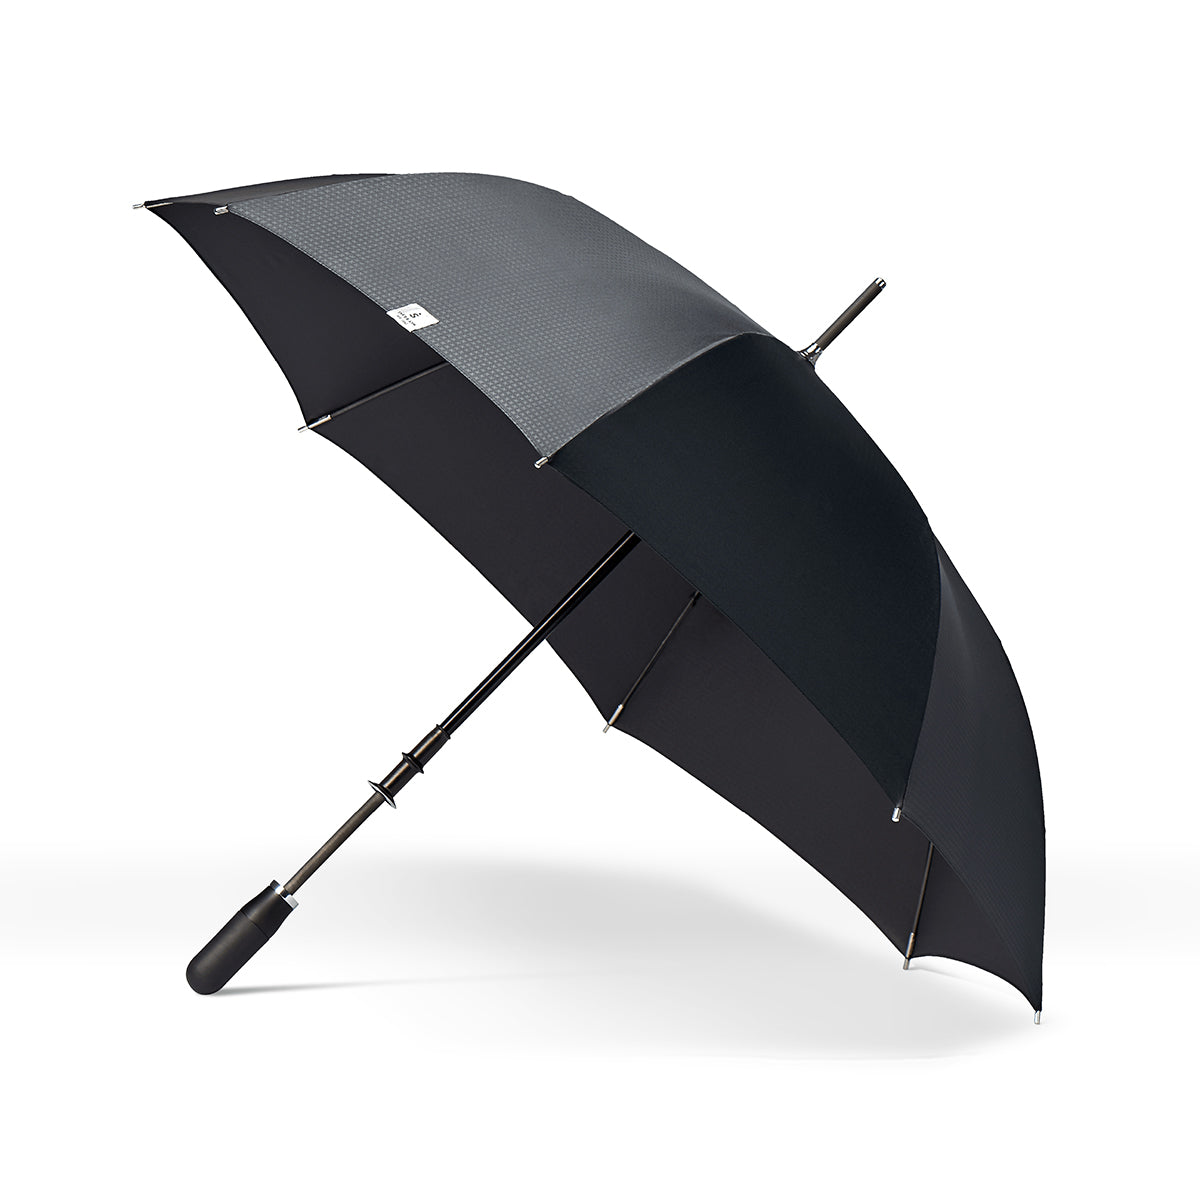 side view of a handmade manual open luxury golf umbrella with a matte black TPR grip handle, Teflon-coated fine denier woven black polyester twill canopy, chrome trim, carbon fiber shaft, fiberglass ribs, and a reflective strap embroidered with “ShedRain Stratus.”